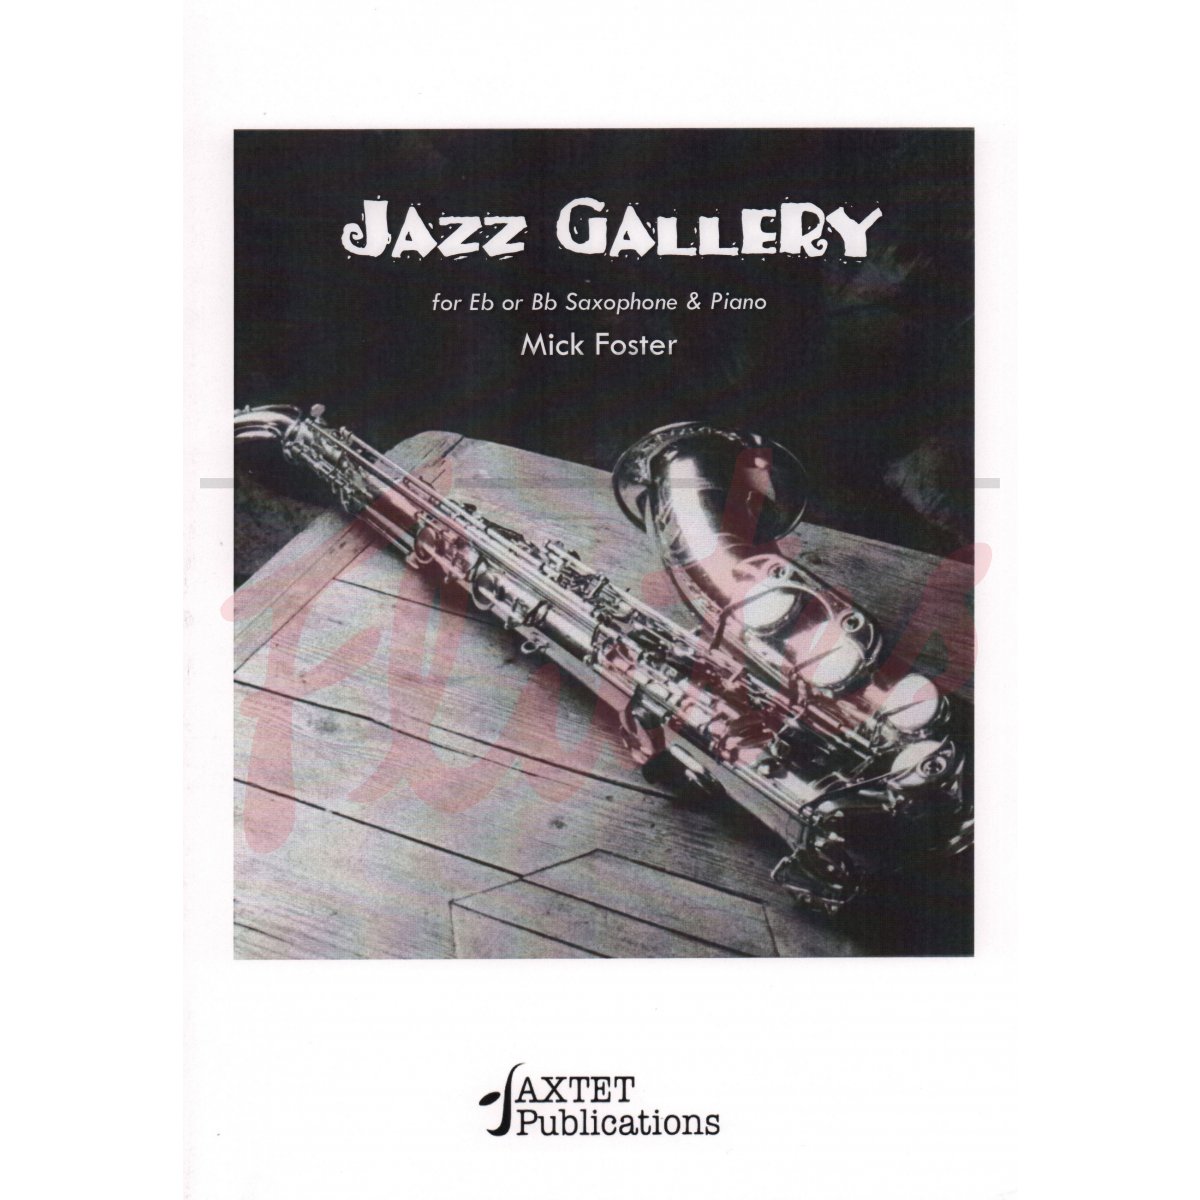 Jazz Gallery for Eb or Bb Saxophone and Piano